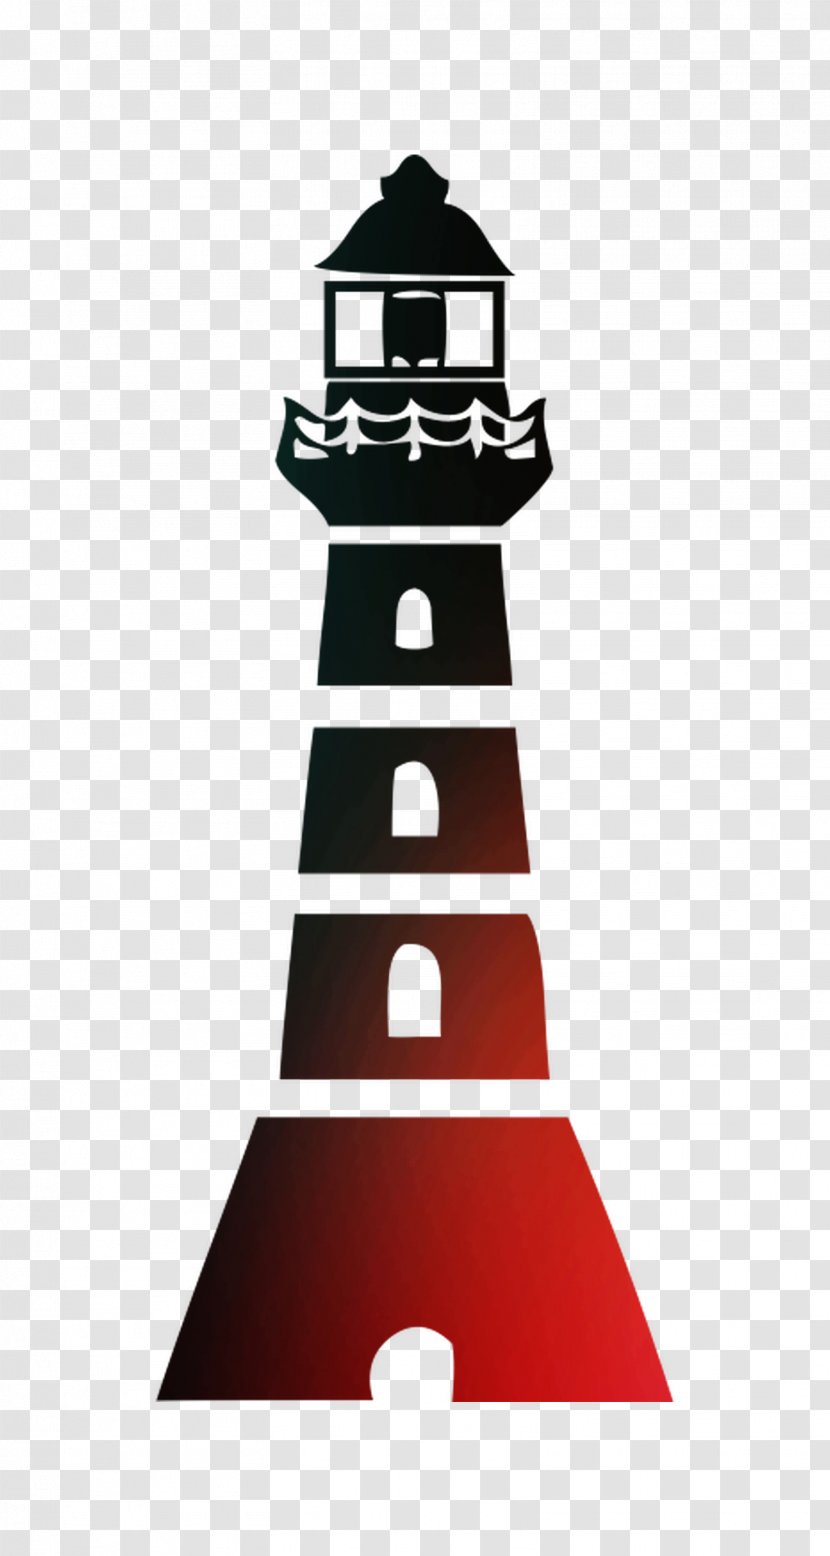 Stock Photography Image Vector Graphics Alamy Drawing - Tower - Text Transparent PNG